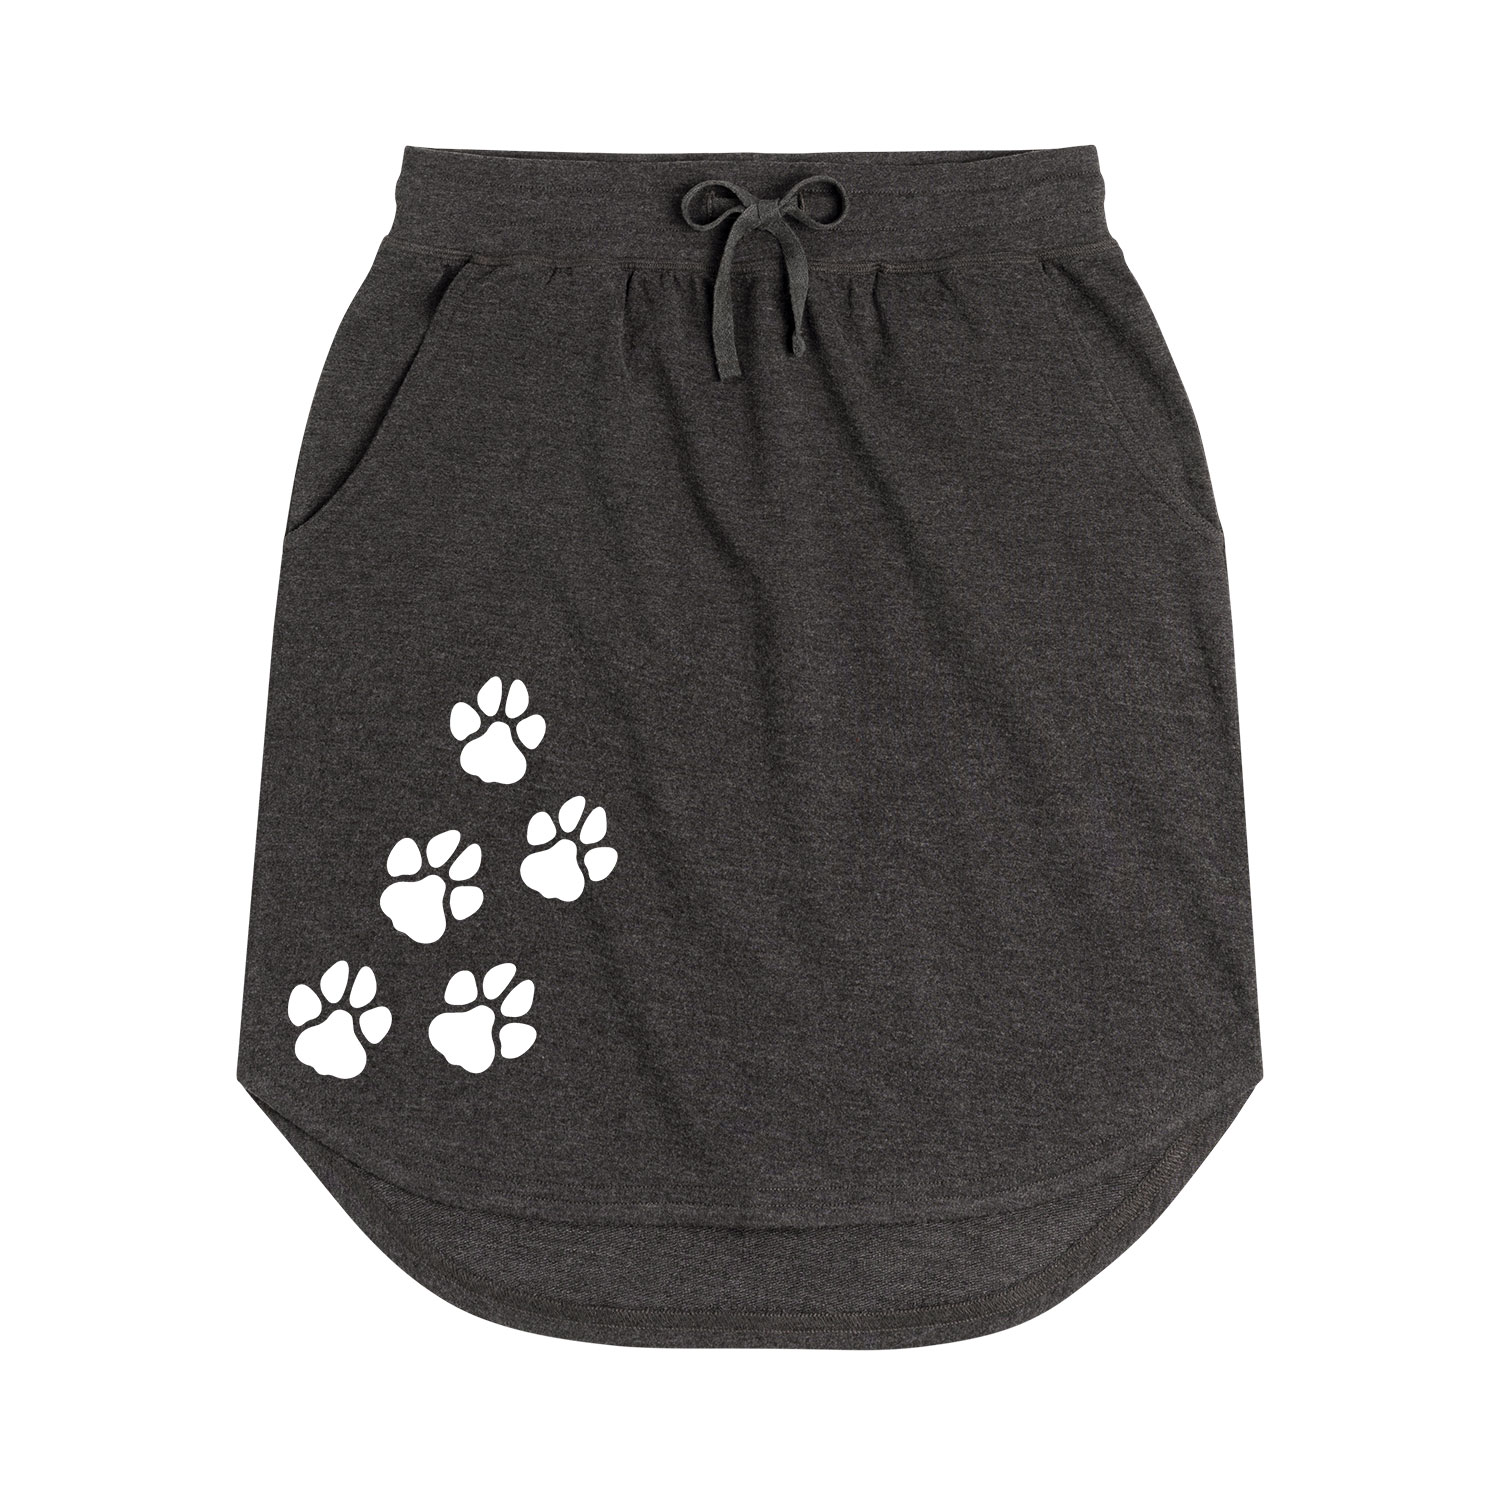 Instant Message - White Pawprints - Women's Weekend Skirt - image 1 of 4